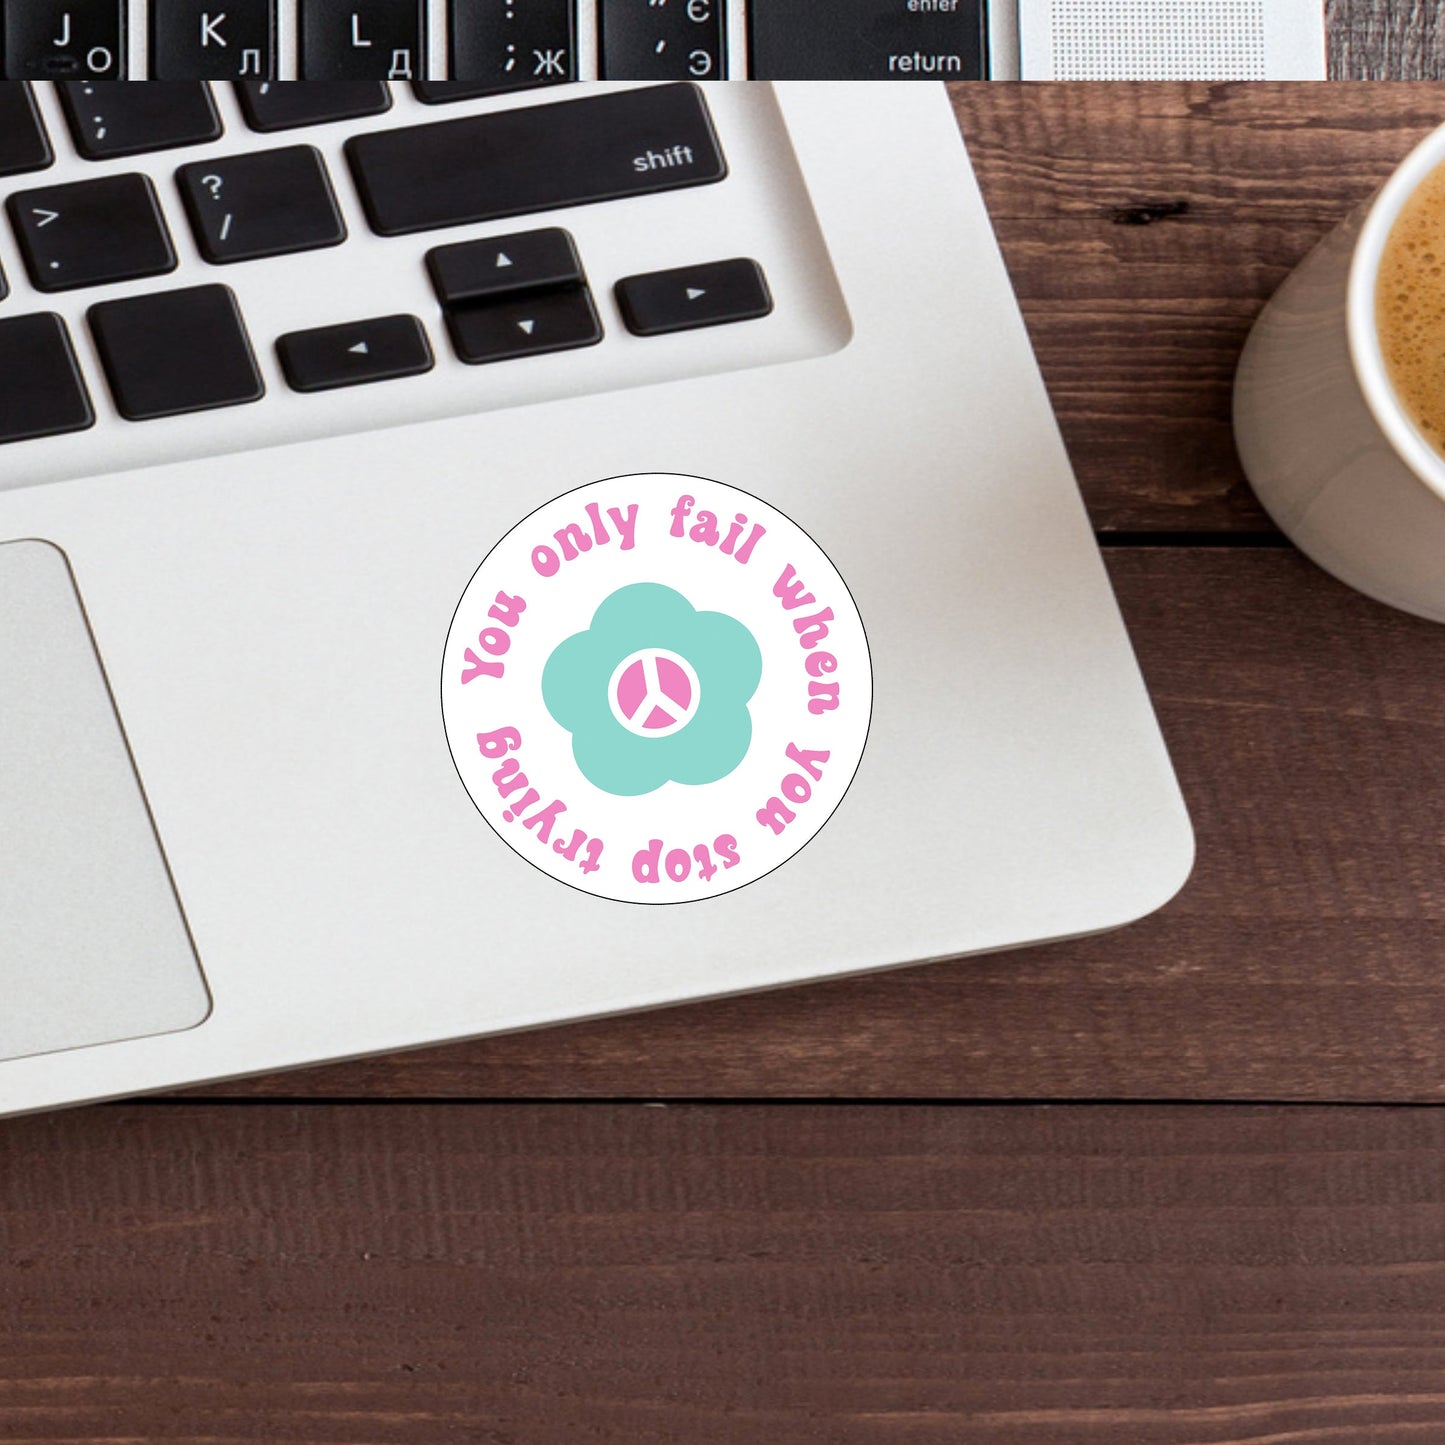 You only fail when you stop trying  Sticker,  Vinyl sticker, laptop sticker, Tablet sticker